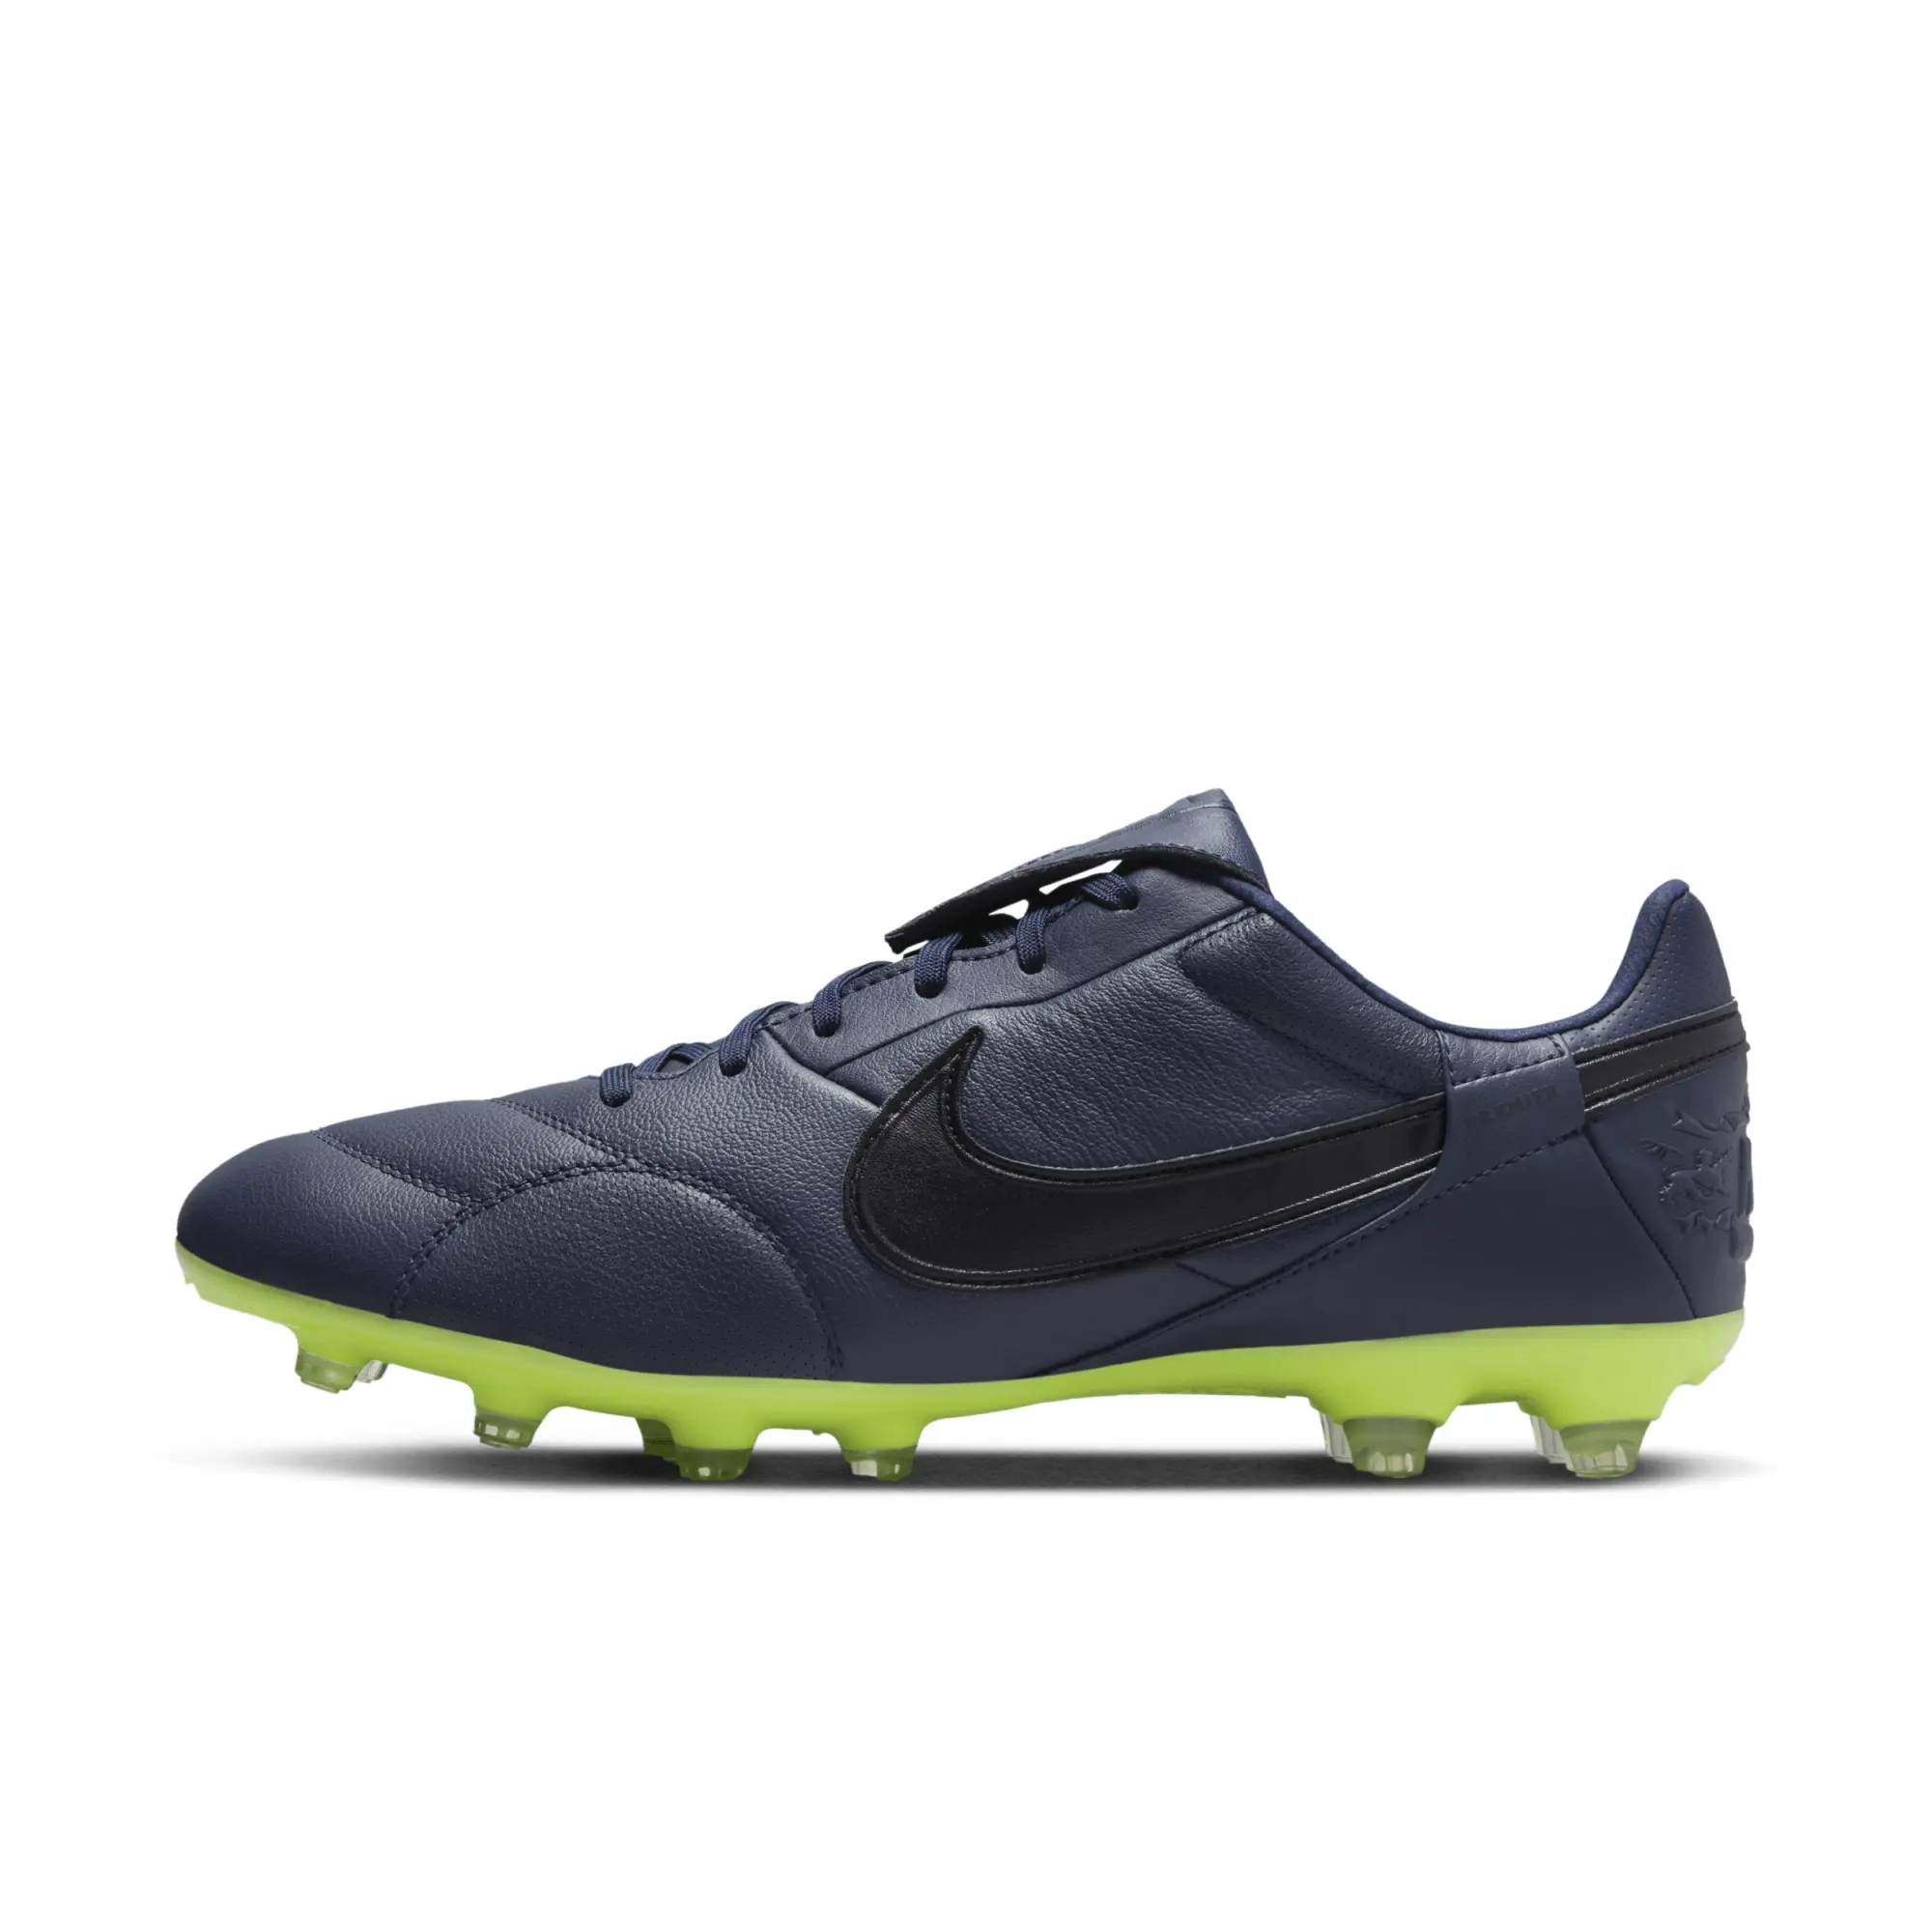 The Nike Premier 3 FG Firm-Ground Football Boot - Blue